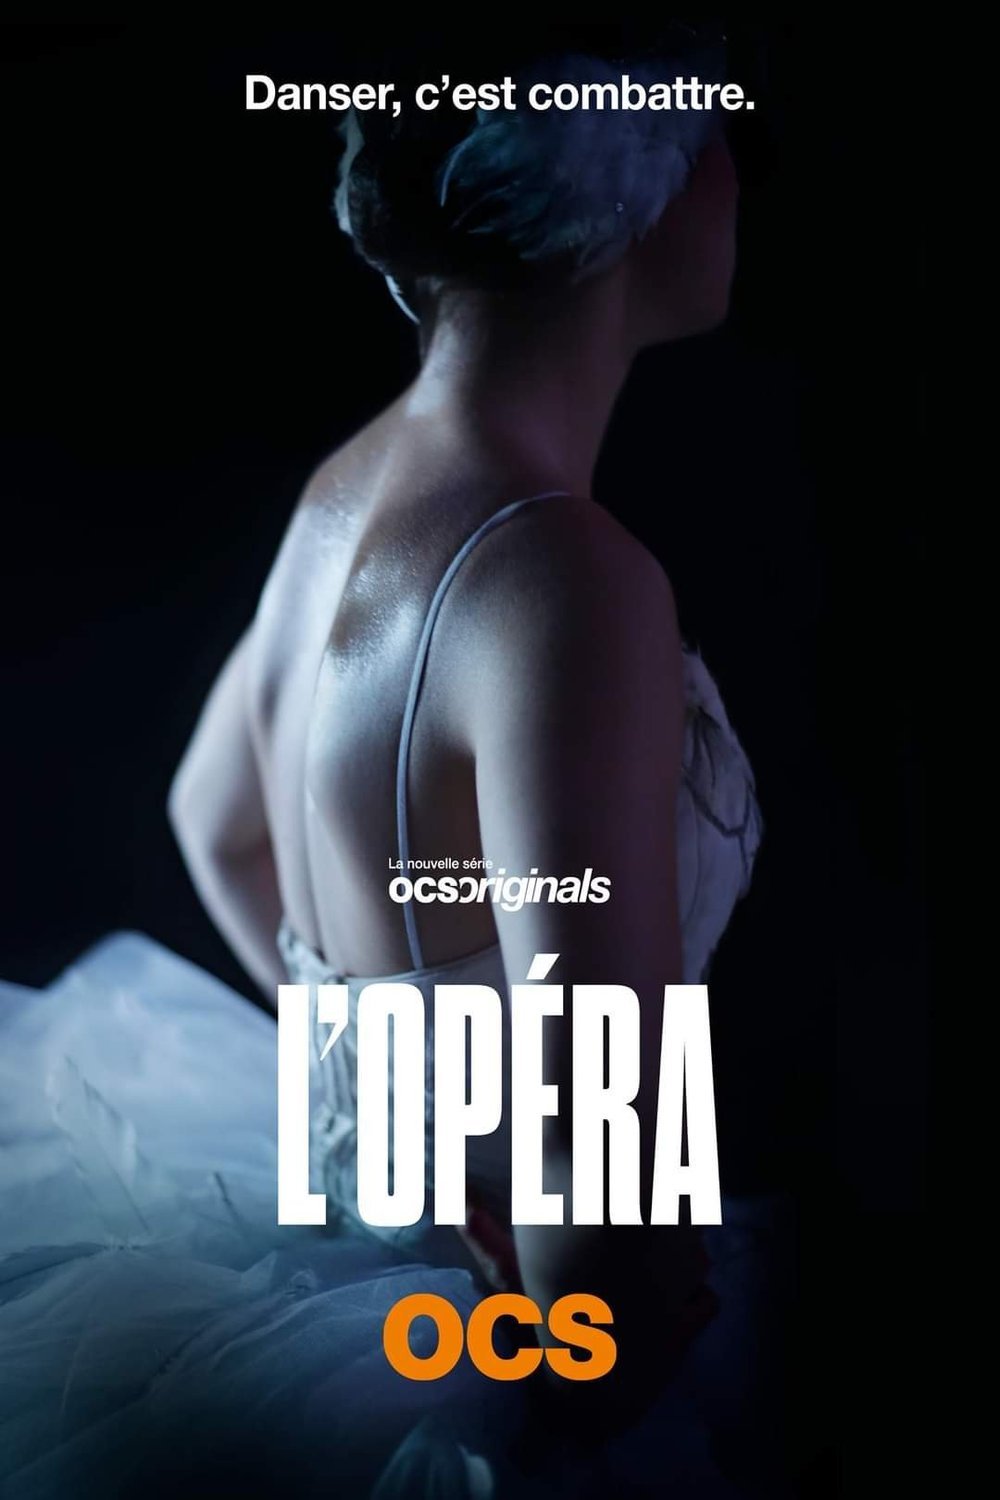 Poster of the movie L'Opéra